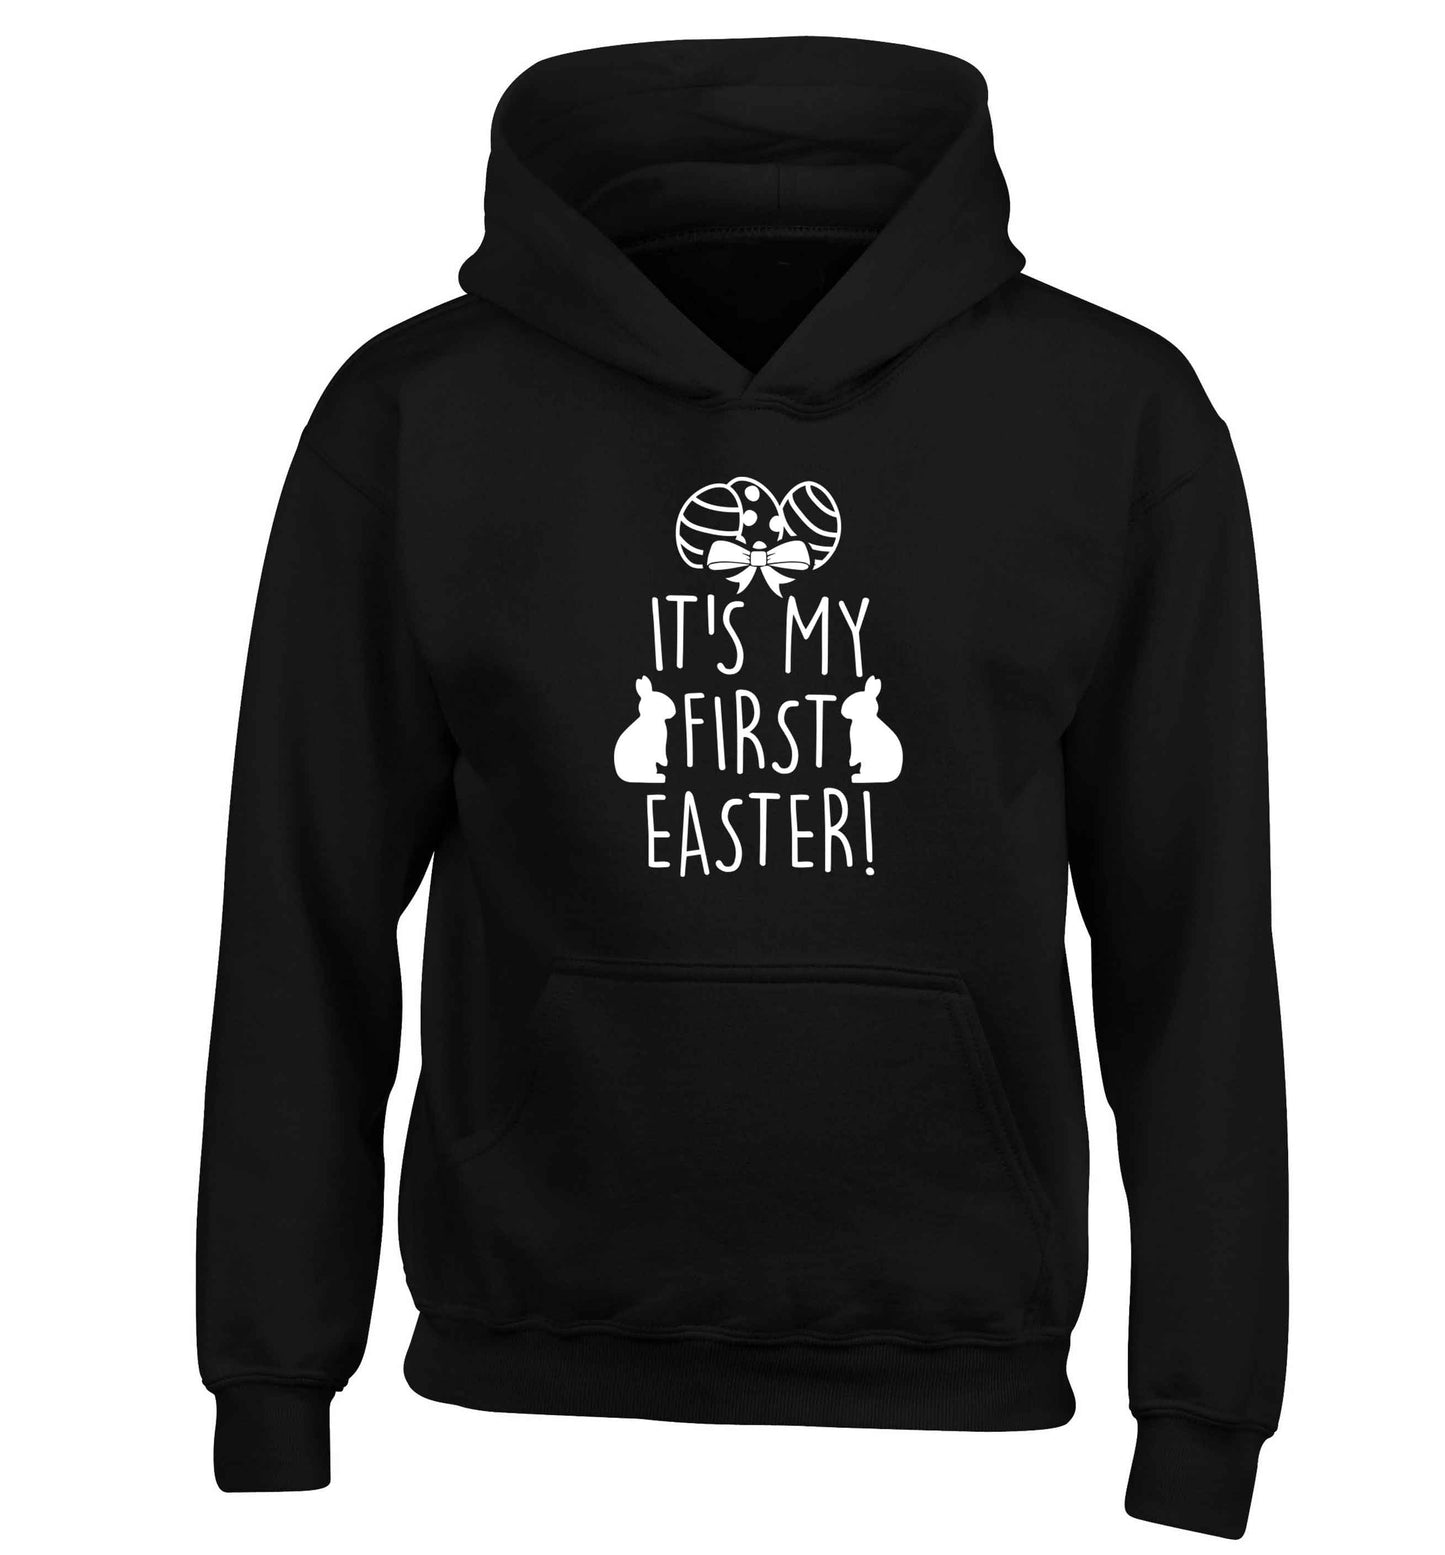 It's my first Easter children's black hoodie 12-13 Years